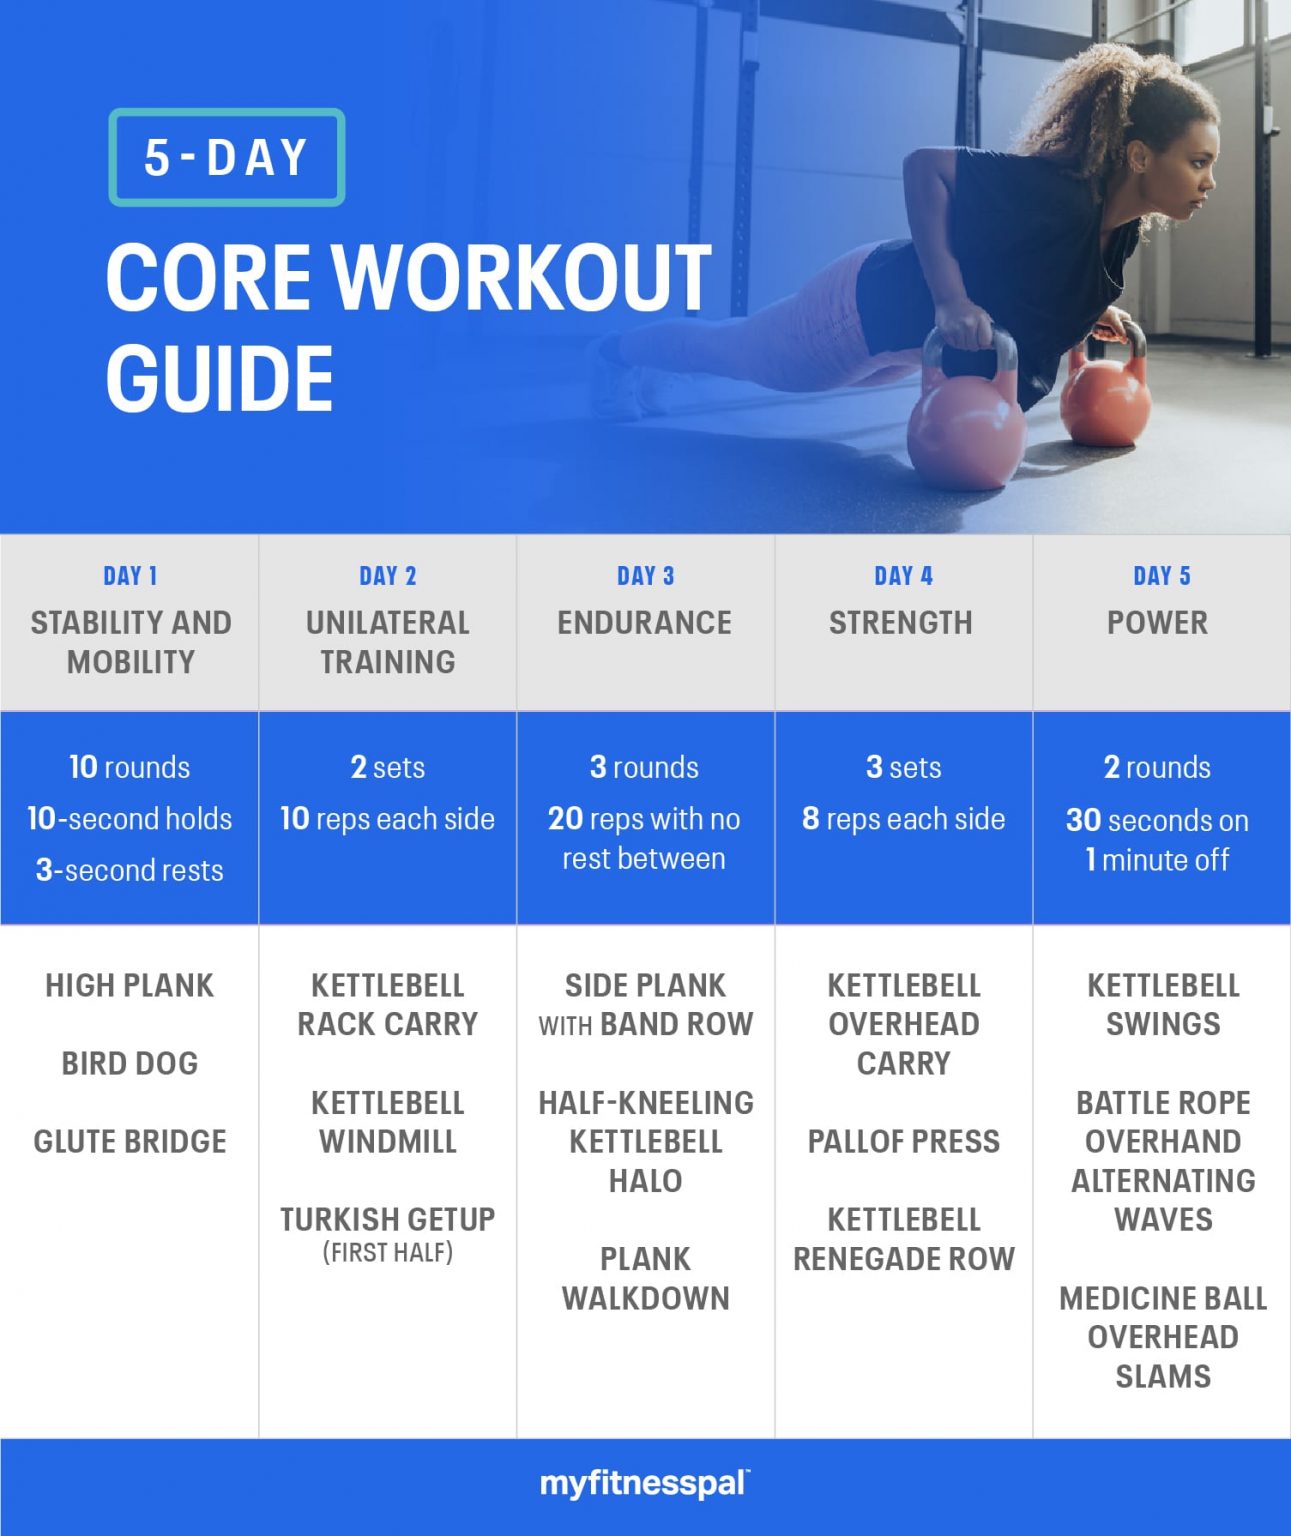 5-Day Core Workout Guide | Fitness | MyFitnessPal